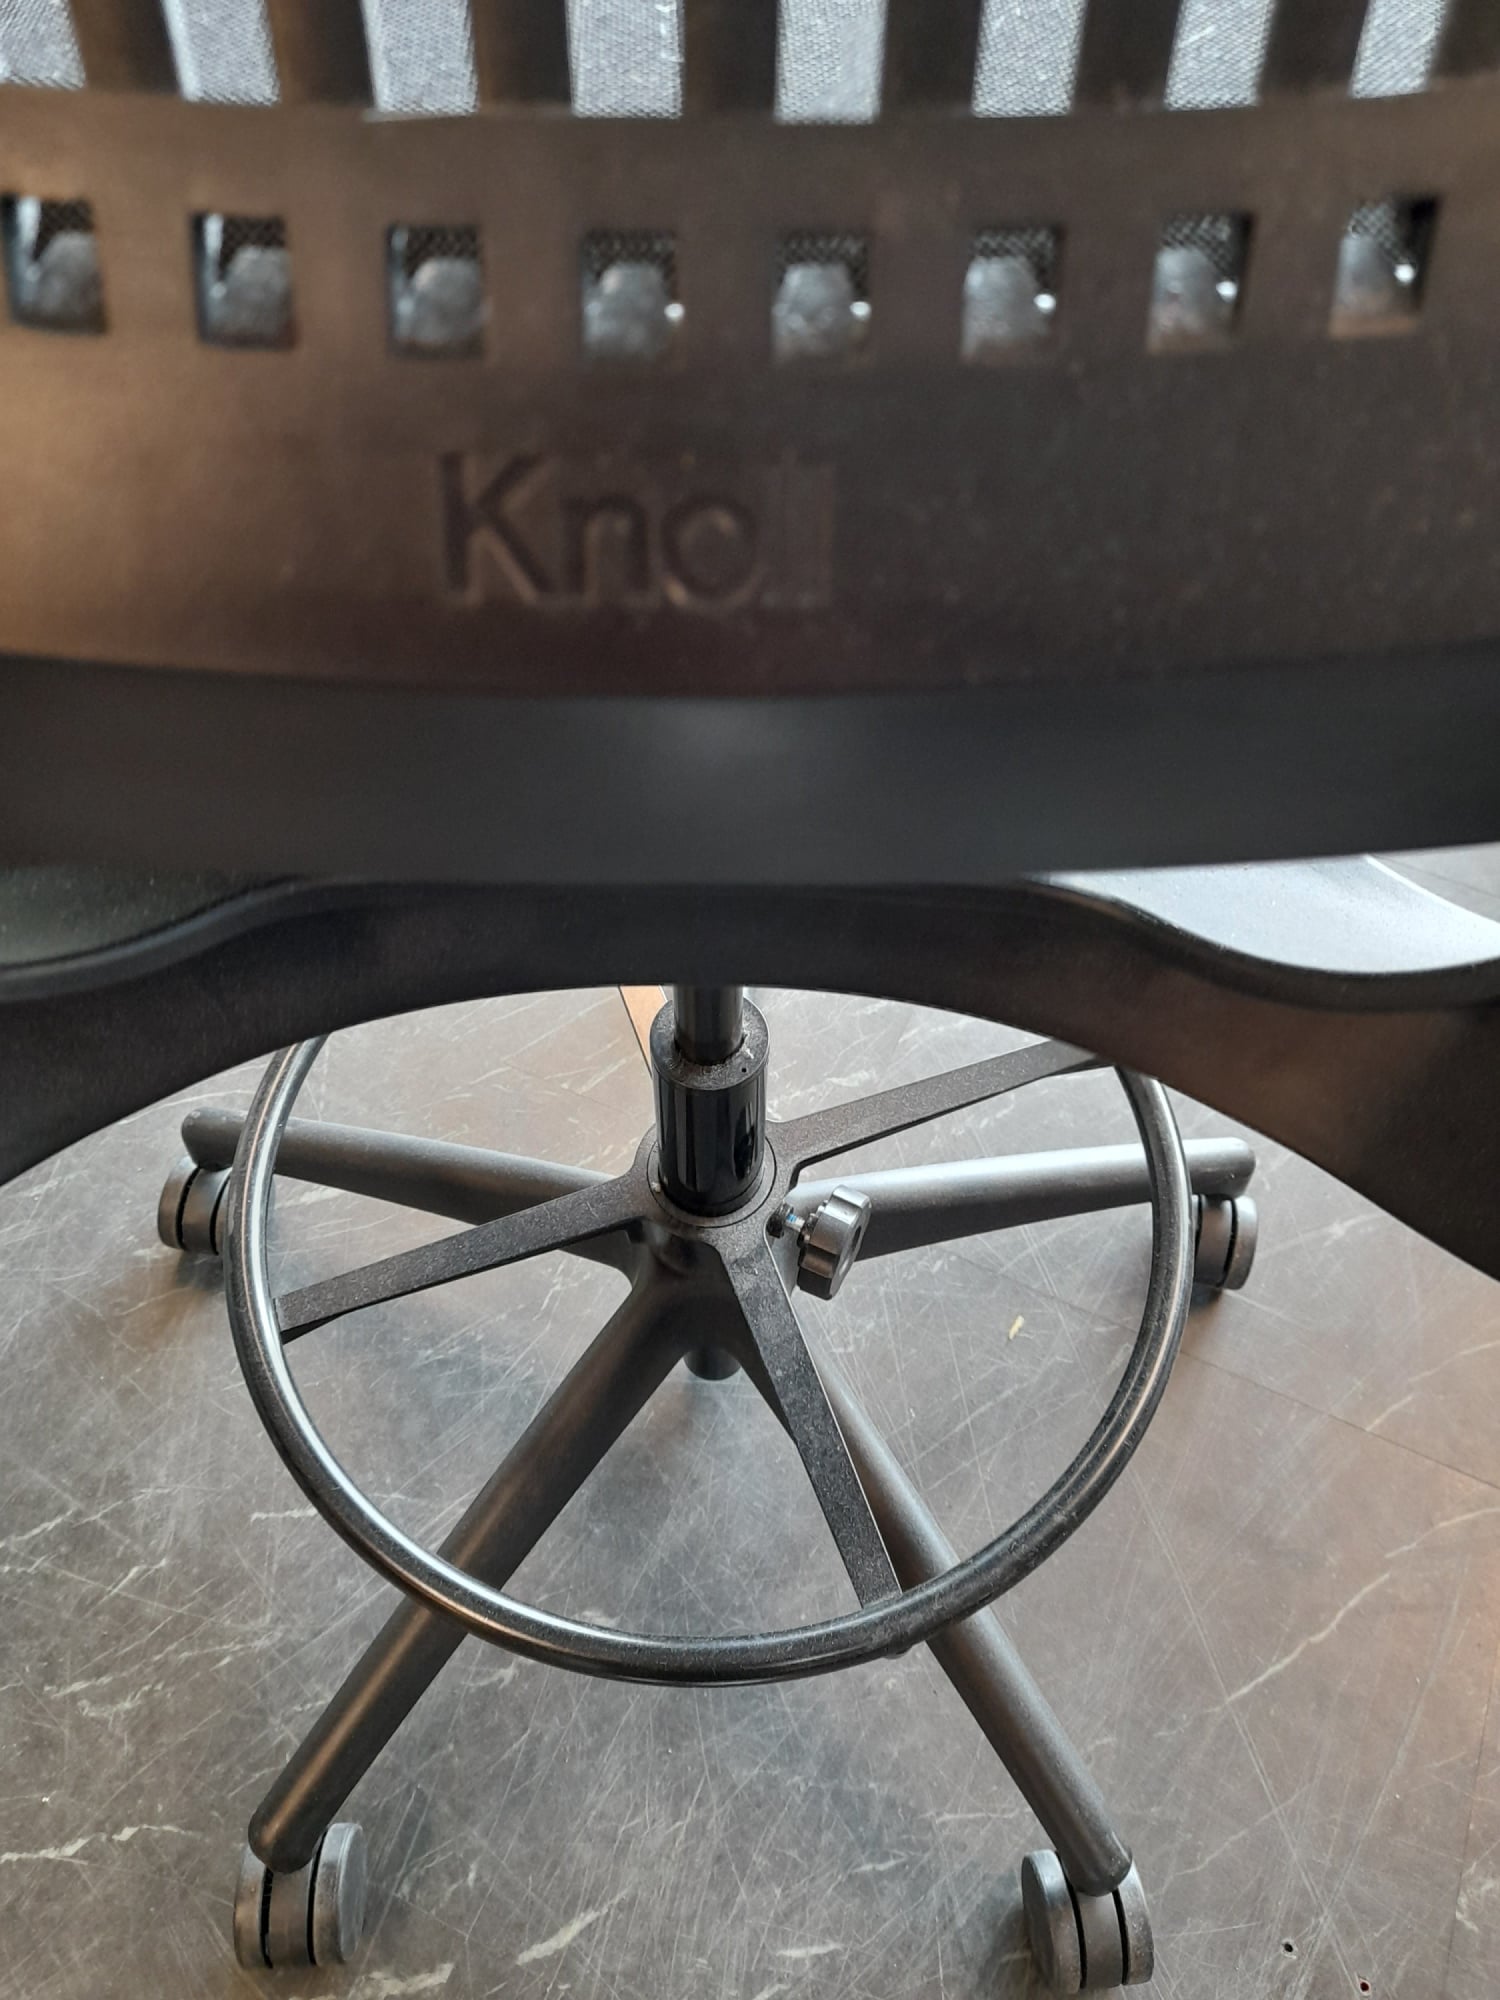 Knoll Generation - High Task - Office Chair